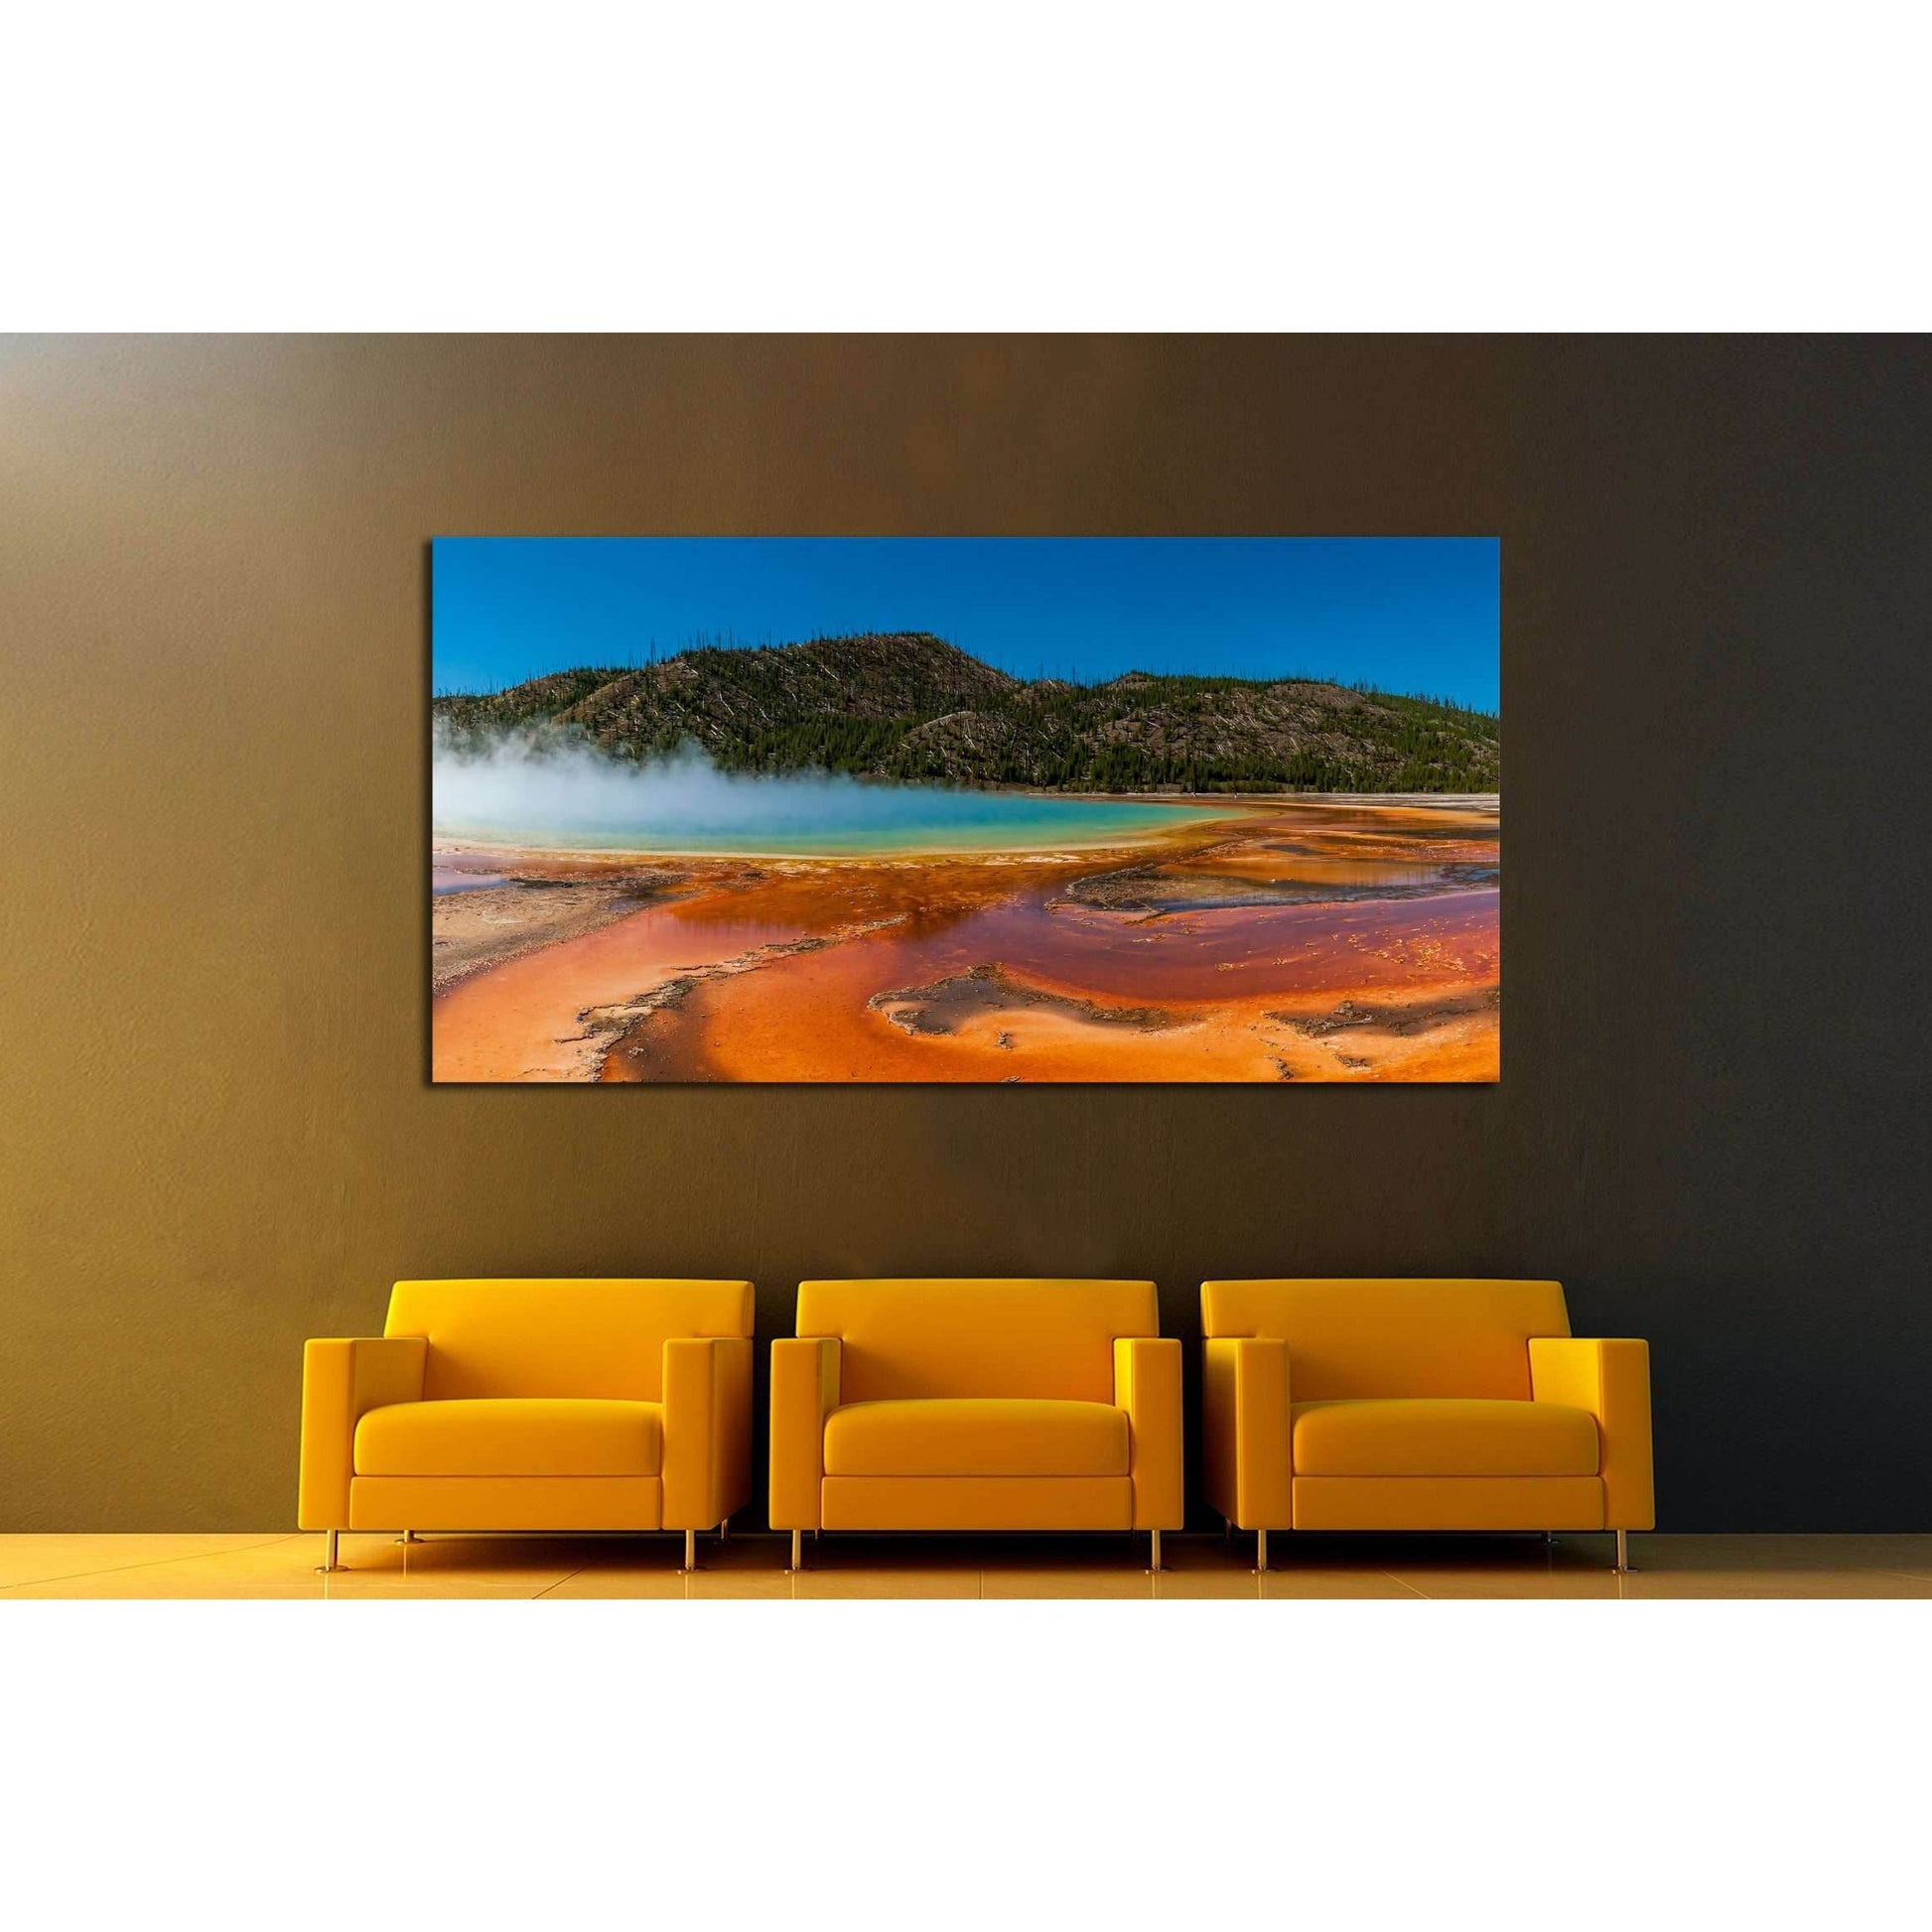 Grand Prismatic Spring Canvas Print for Nature-Inspired DecorThis canvas print features the iconic Grand Prismatic Spring in Yellowstone National Park, known for its striking color gradient and steamy, ethereal quality. The vivid oranges and blues against